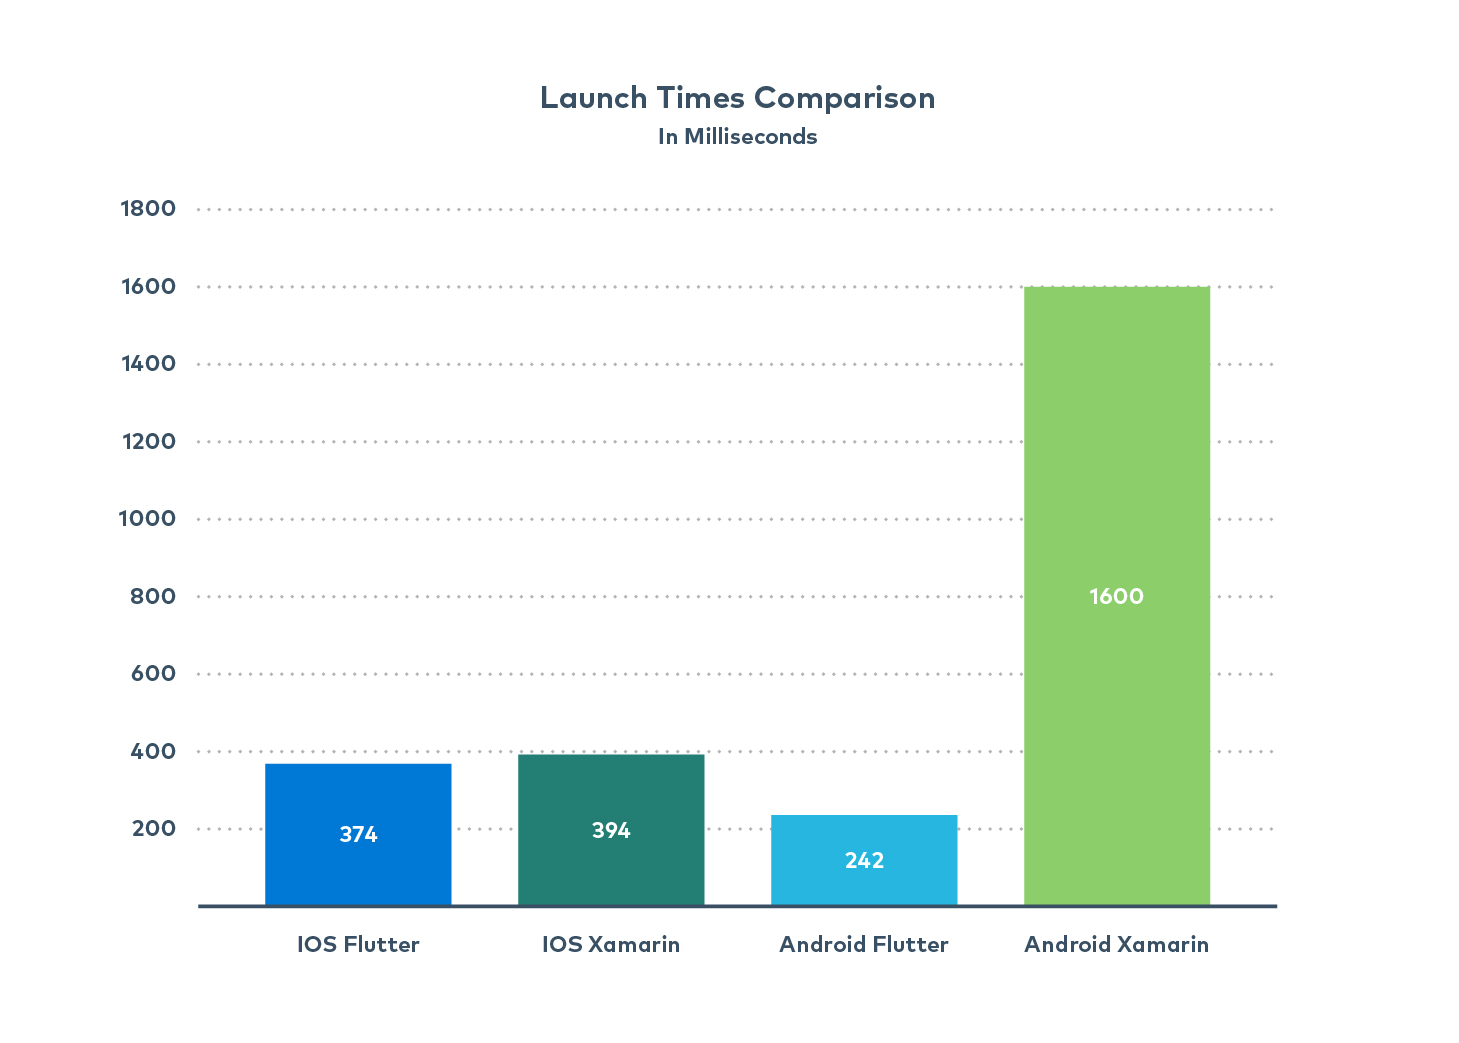 Graphic of a bar chart comparing “IOS Flutter”, “IOS Xamarin”, “Android Flutter”, and “Android Xamarin”. The title of the graph reads “Launch Times Comparison in Milliseconds”.